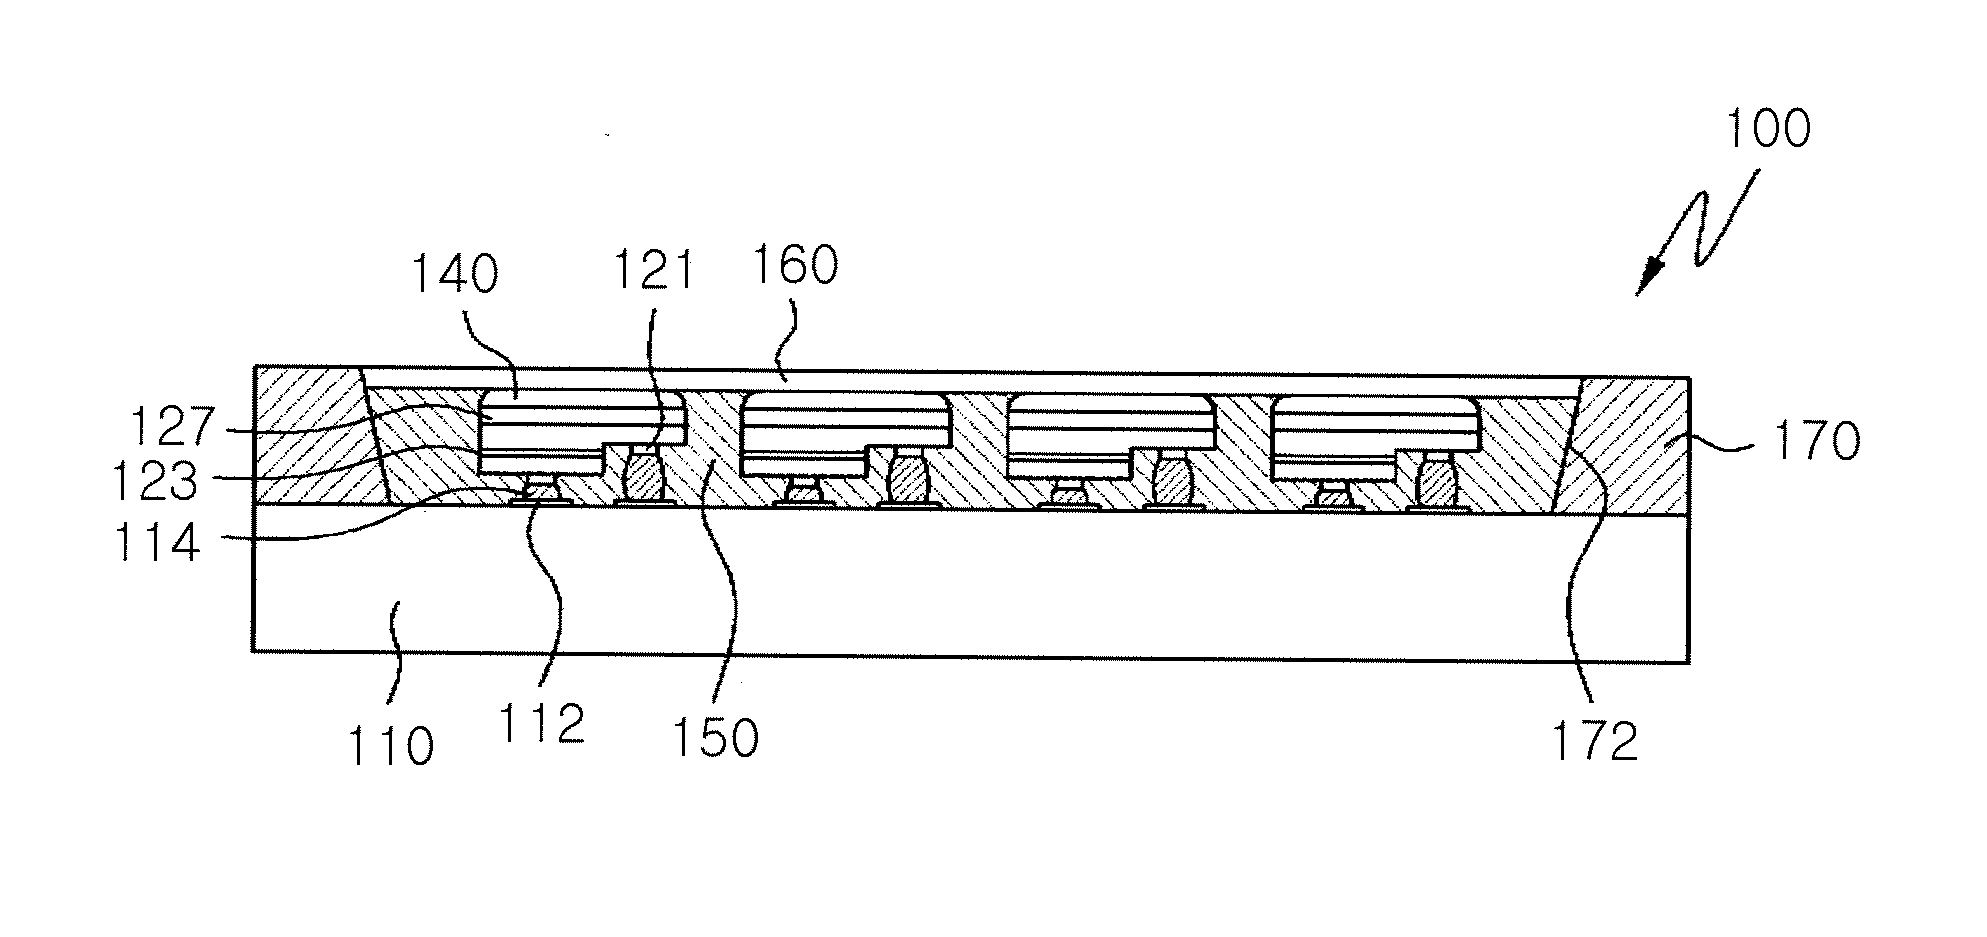 Light emitting diode package, lighting apparatus having the same, and method for manufacturing light emitting diode package